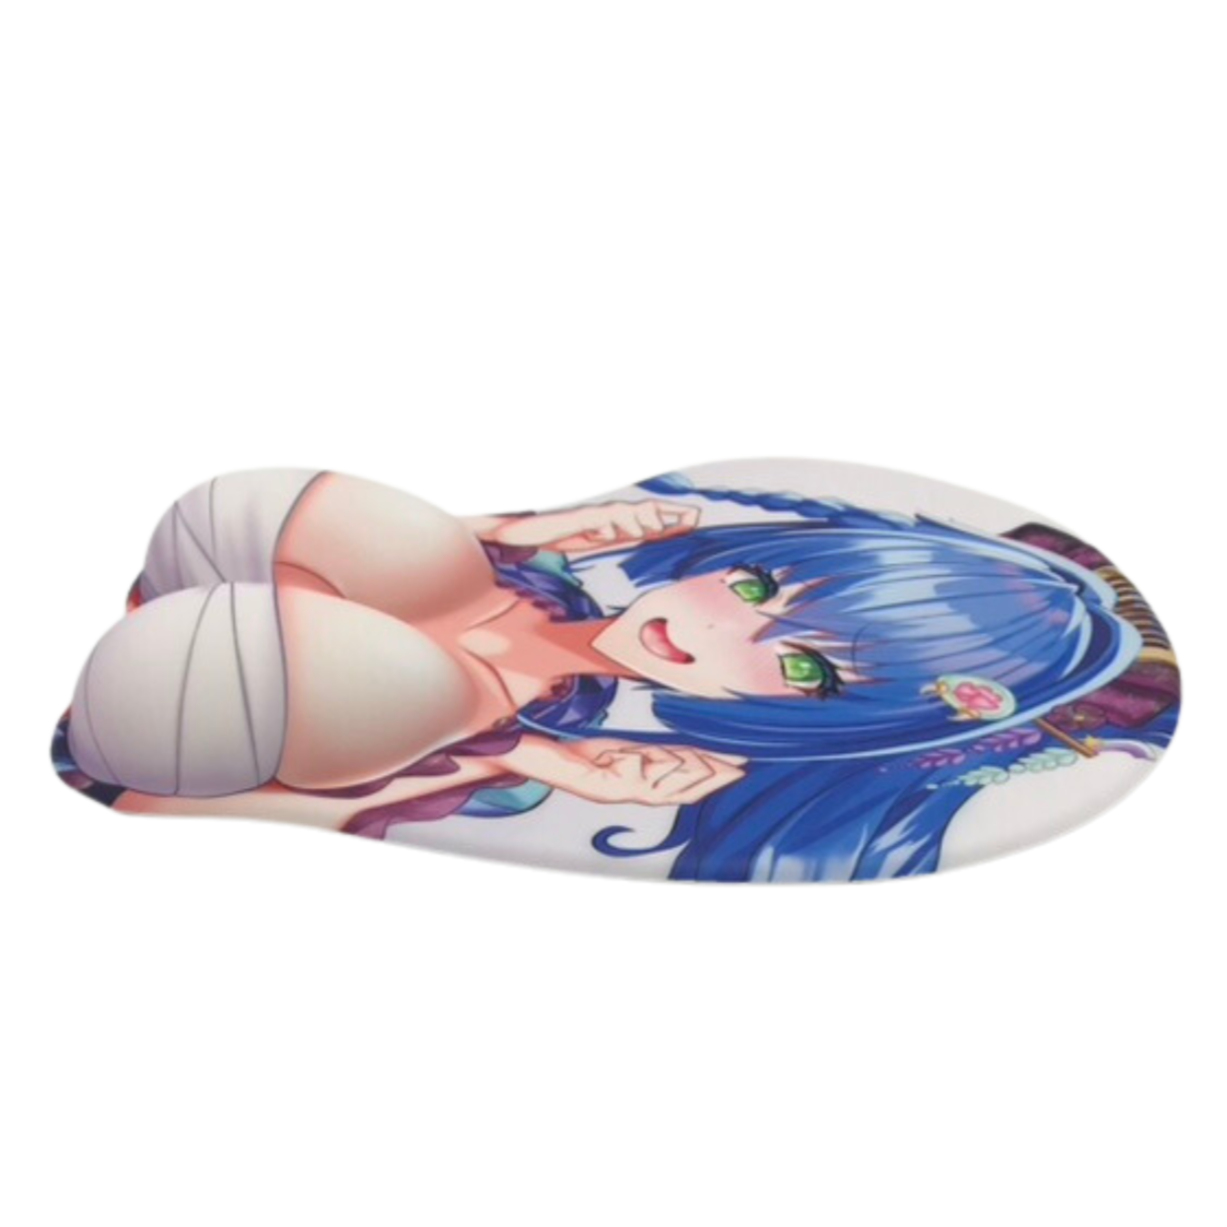 Phant_TV - 3D Mouse Pad With Wrist Support - Kimono Oppai